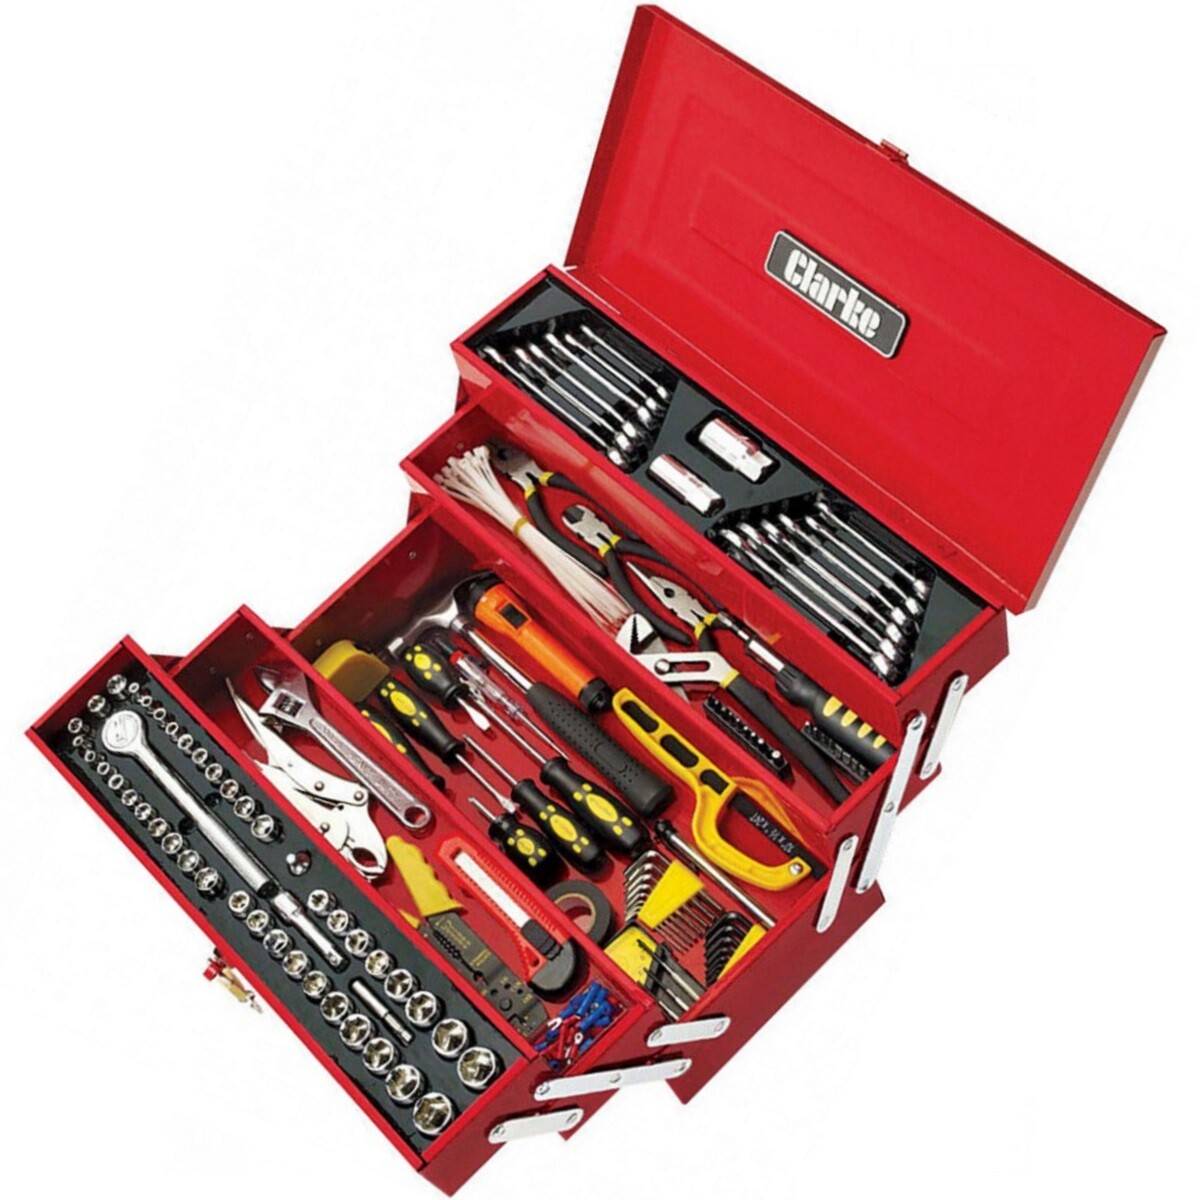 Clarke Cht641 199 Piece Diy Tool Kit With Cantilever Tool Box 1801641 From Lawson His